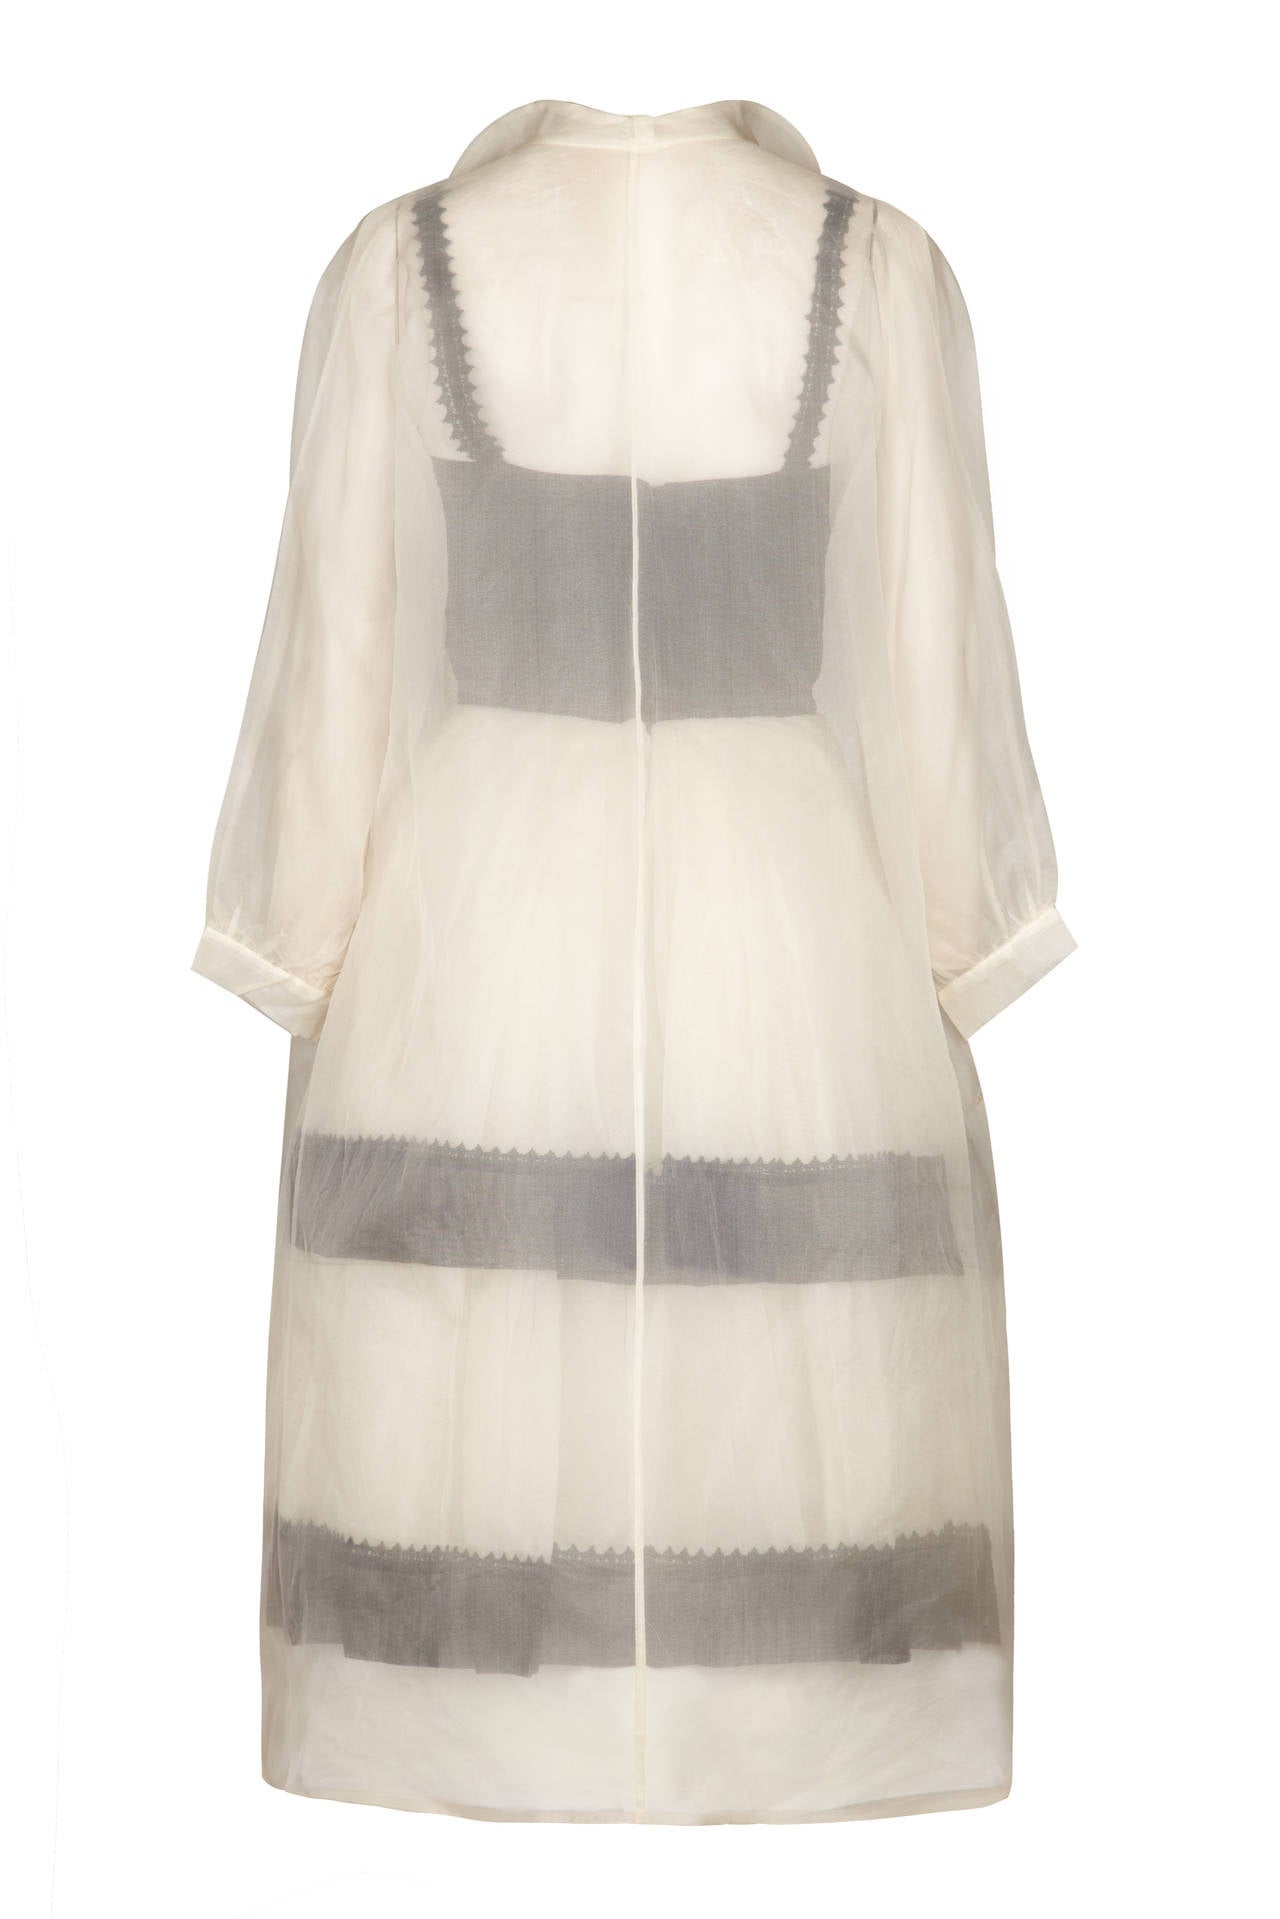 1950s Monochrome Dress With White Organza Overcoat For Sale at 1stdibs